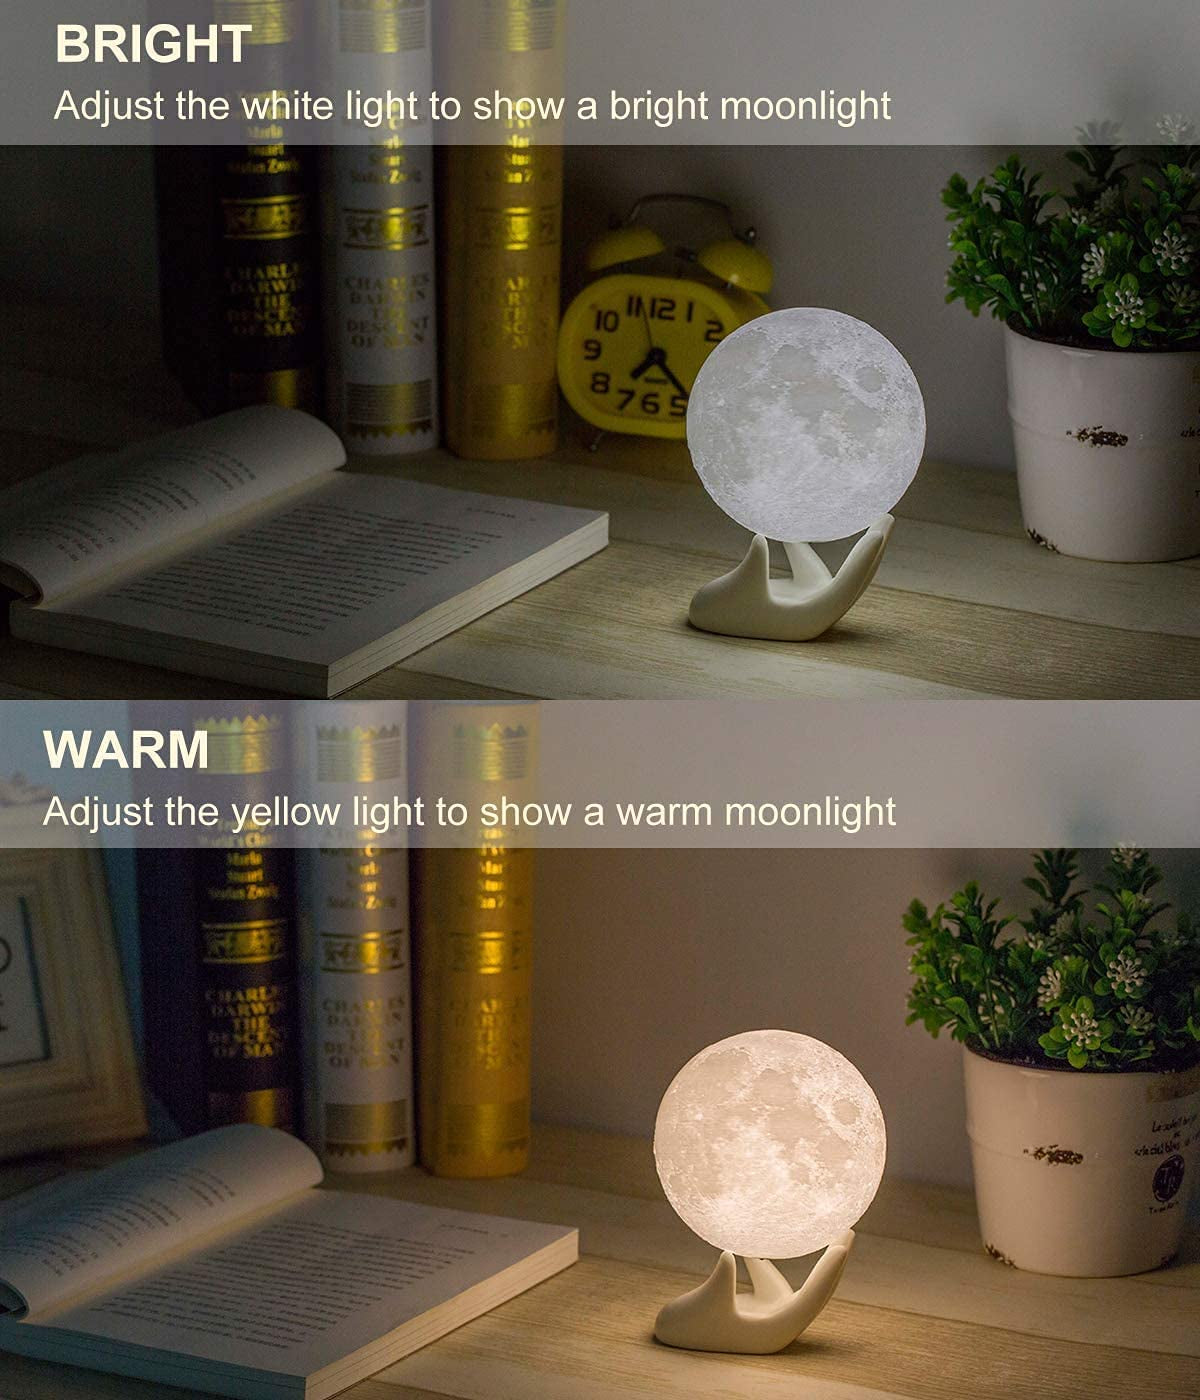 3D Moon Lamp with 3.5 Inch Ceramic Base, LED Night Light, Mood Lighting with Touch Control Brightness for Home Décor, Bedroom, Gifts for Father Kids Women Birthday - White & Yellow